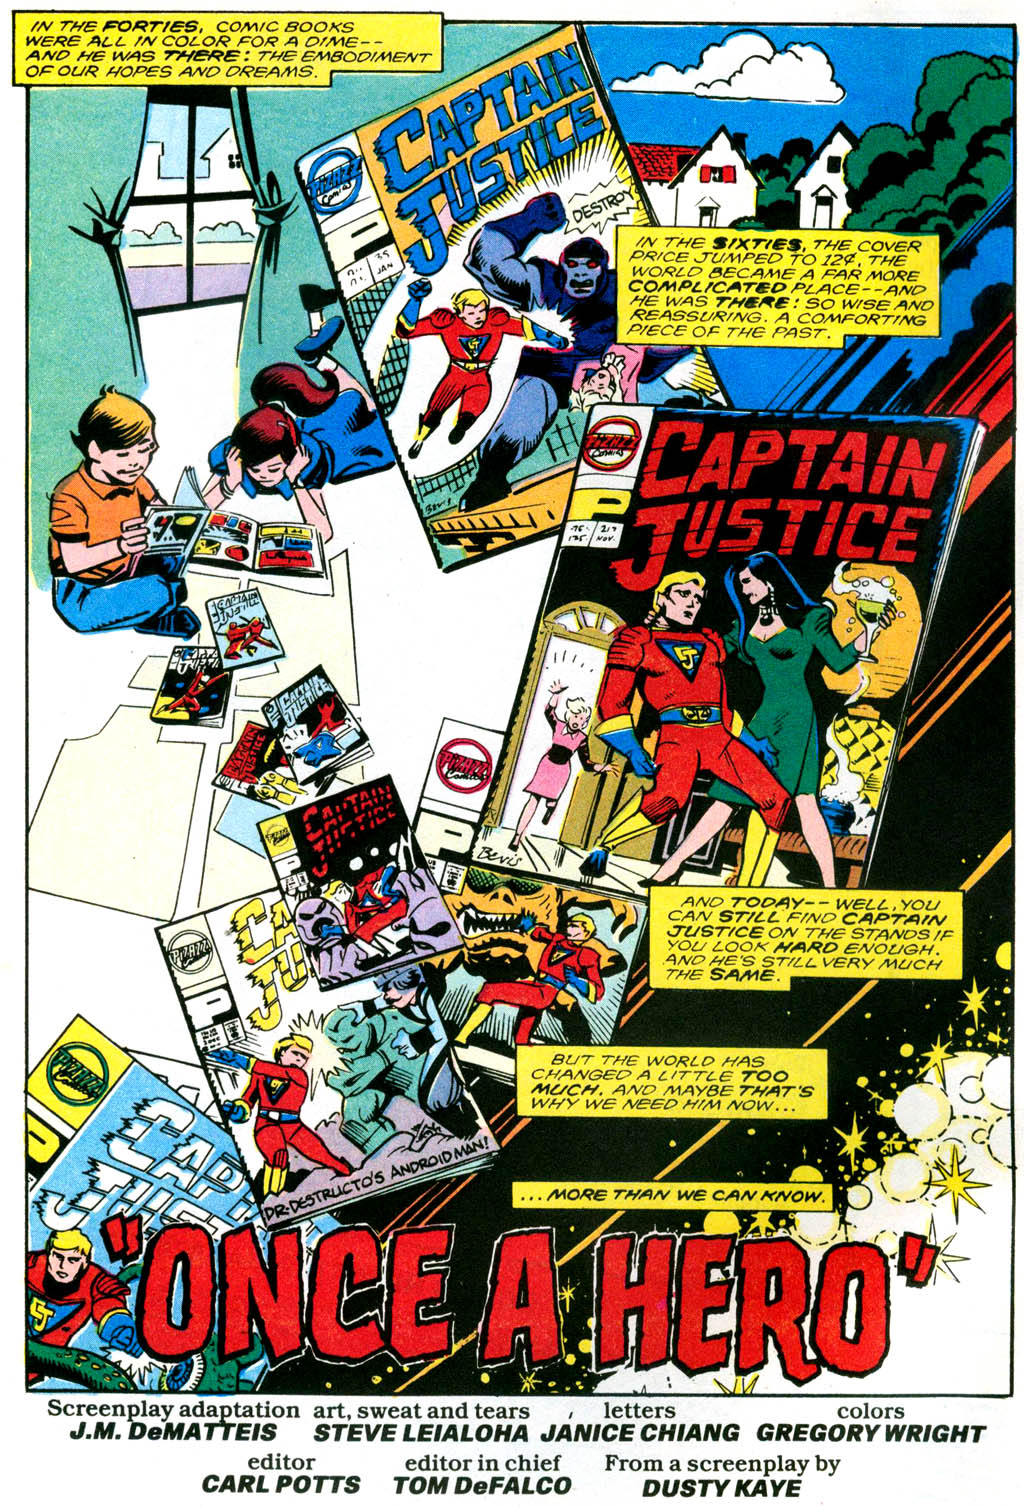 Read online Captain Justice comic -  Issue #1 - 3